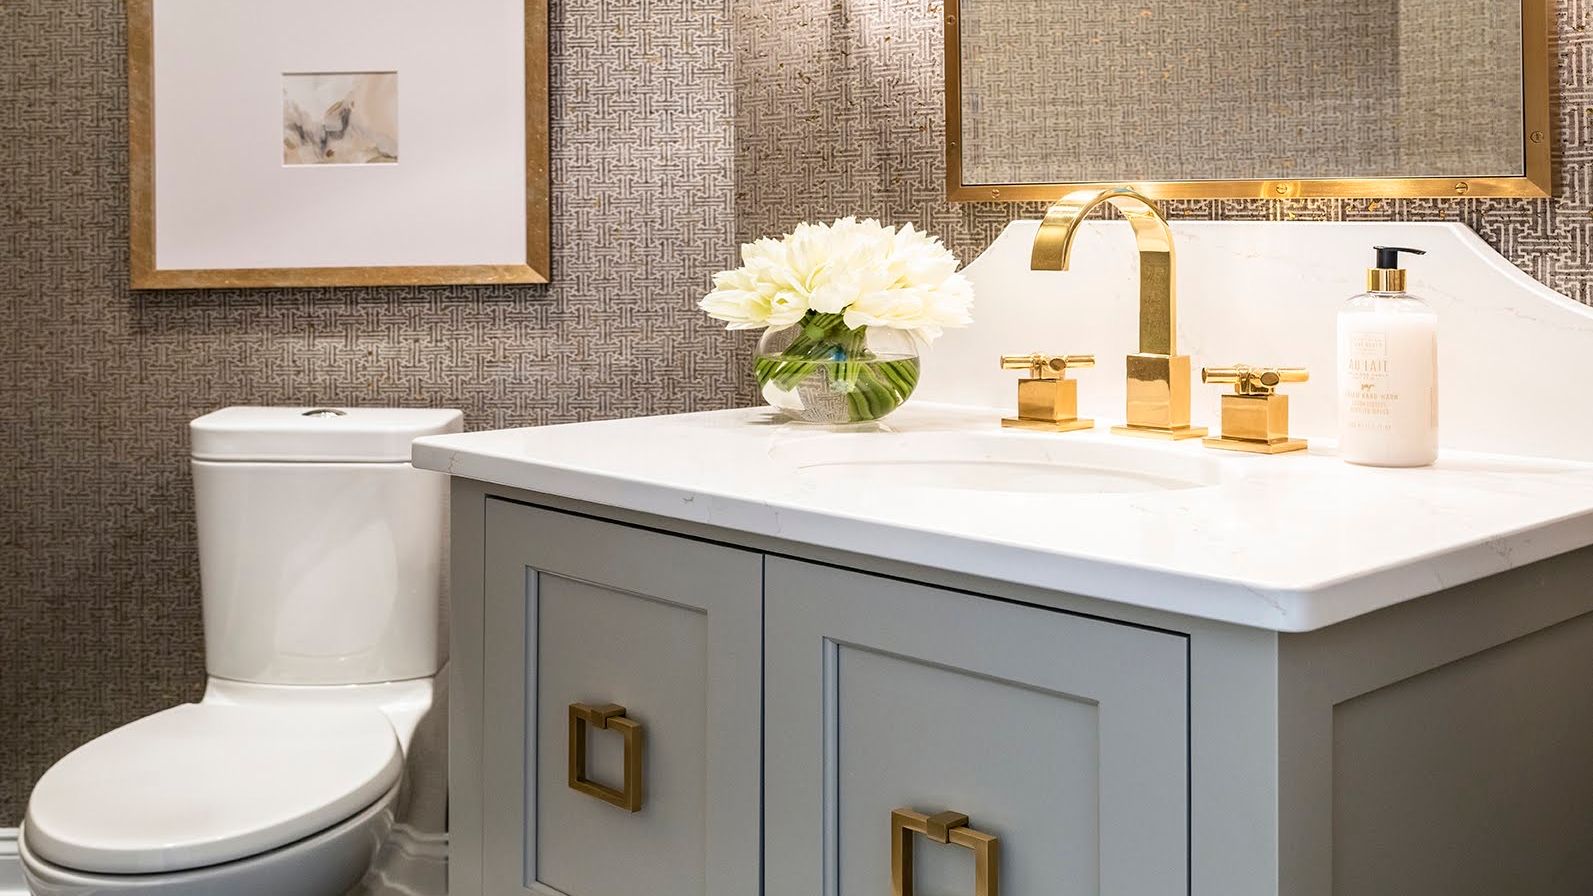 Bathroom with gray furniture vanity and gold accents.